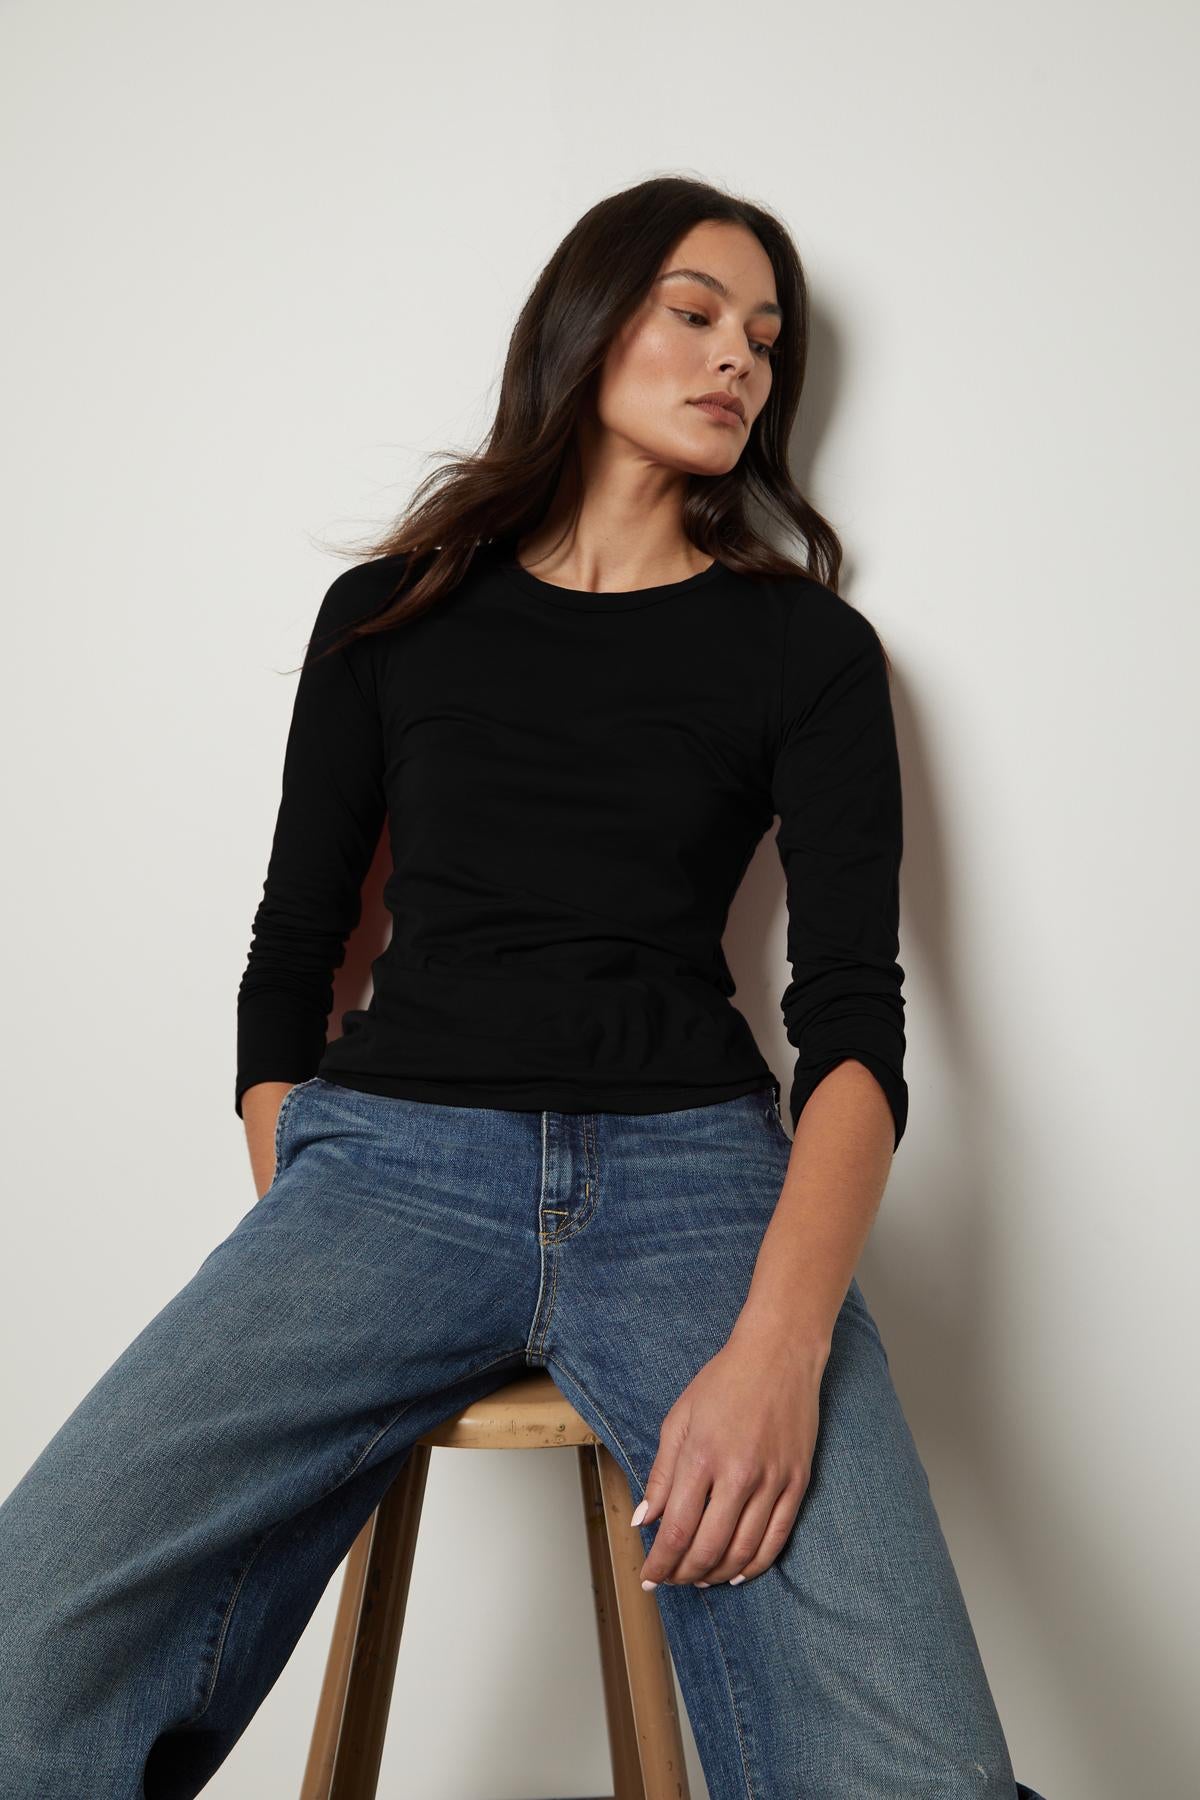 A woman sitting on a stool in black jeans and a ZOFINA GAUZY WHISPER FITTED CREW NECK TEE by Velvet by Graham & Spencer.-35503491088577